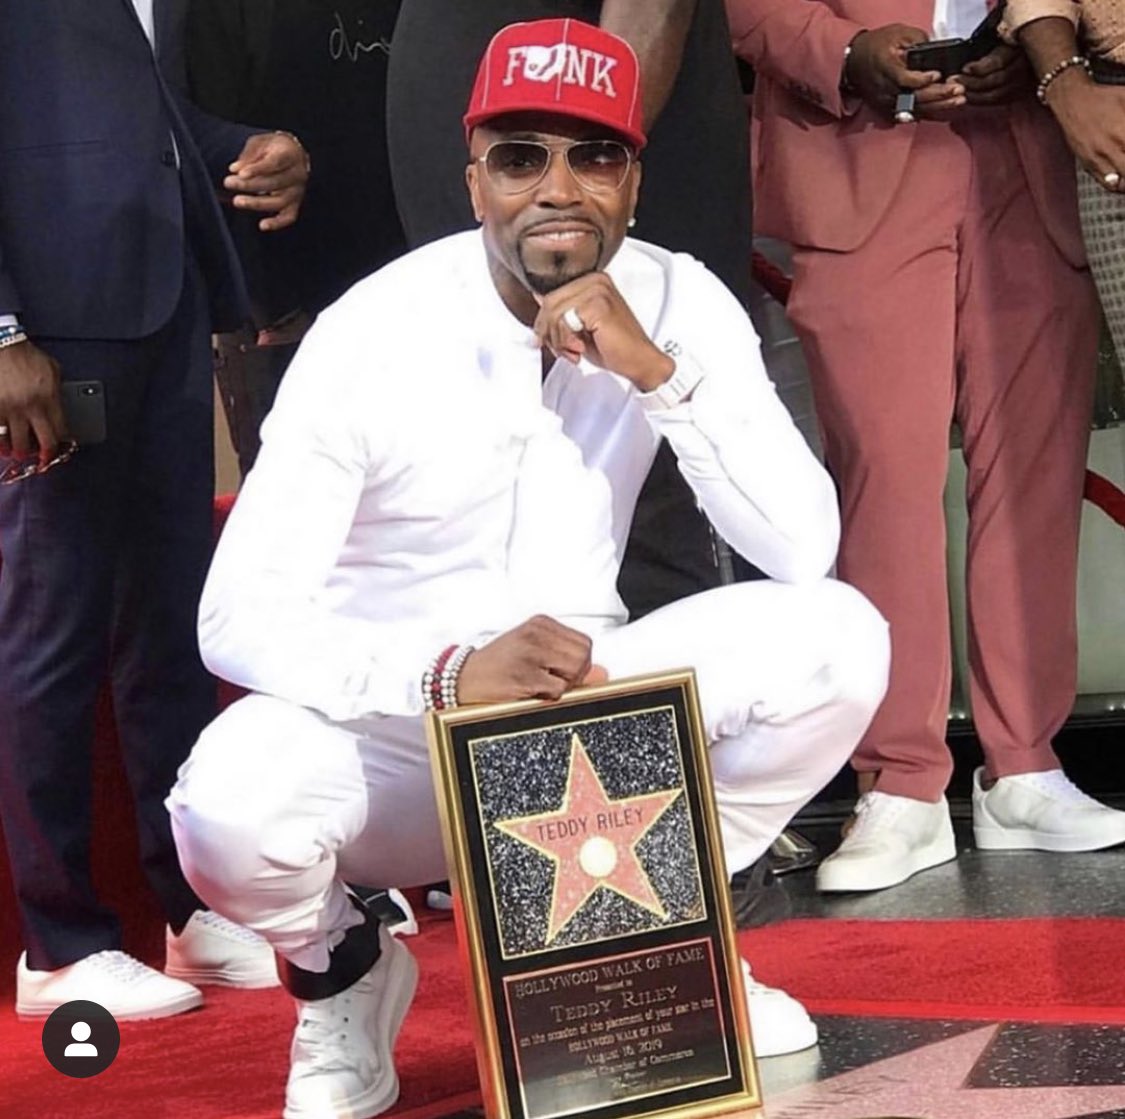 Happy 54th Birthday, to the New Jack Swing creator, Teddy Riley!

Favorite song he s produced? 